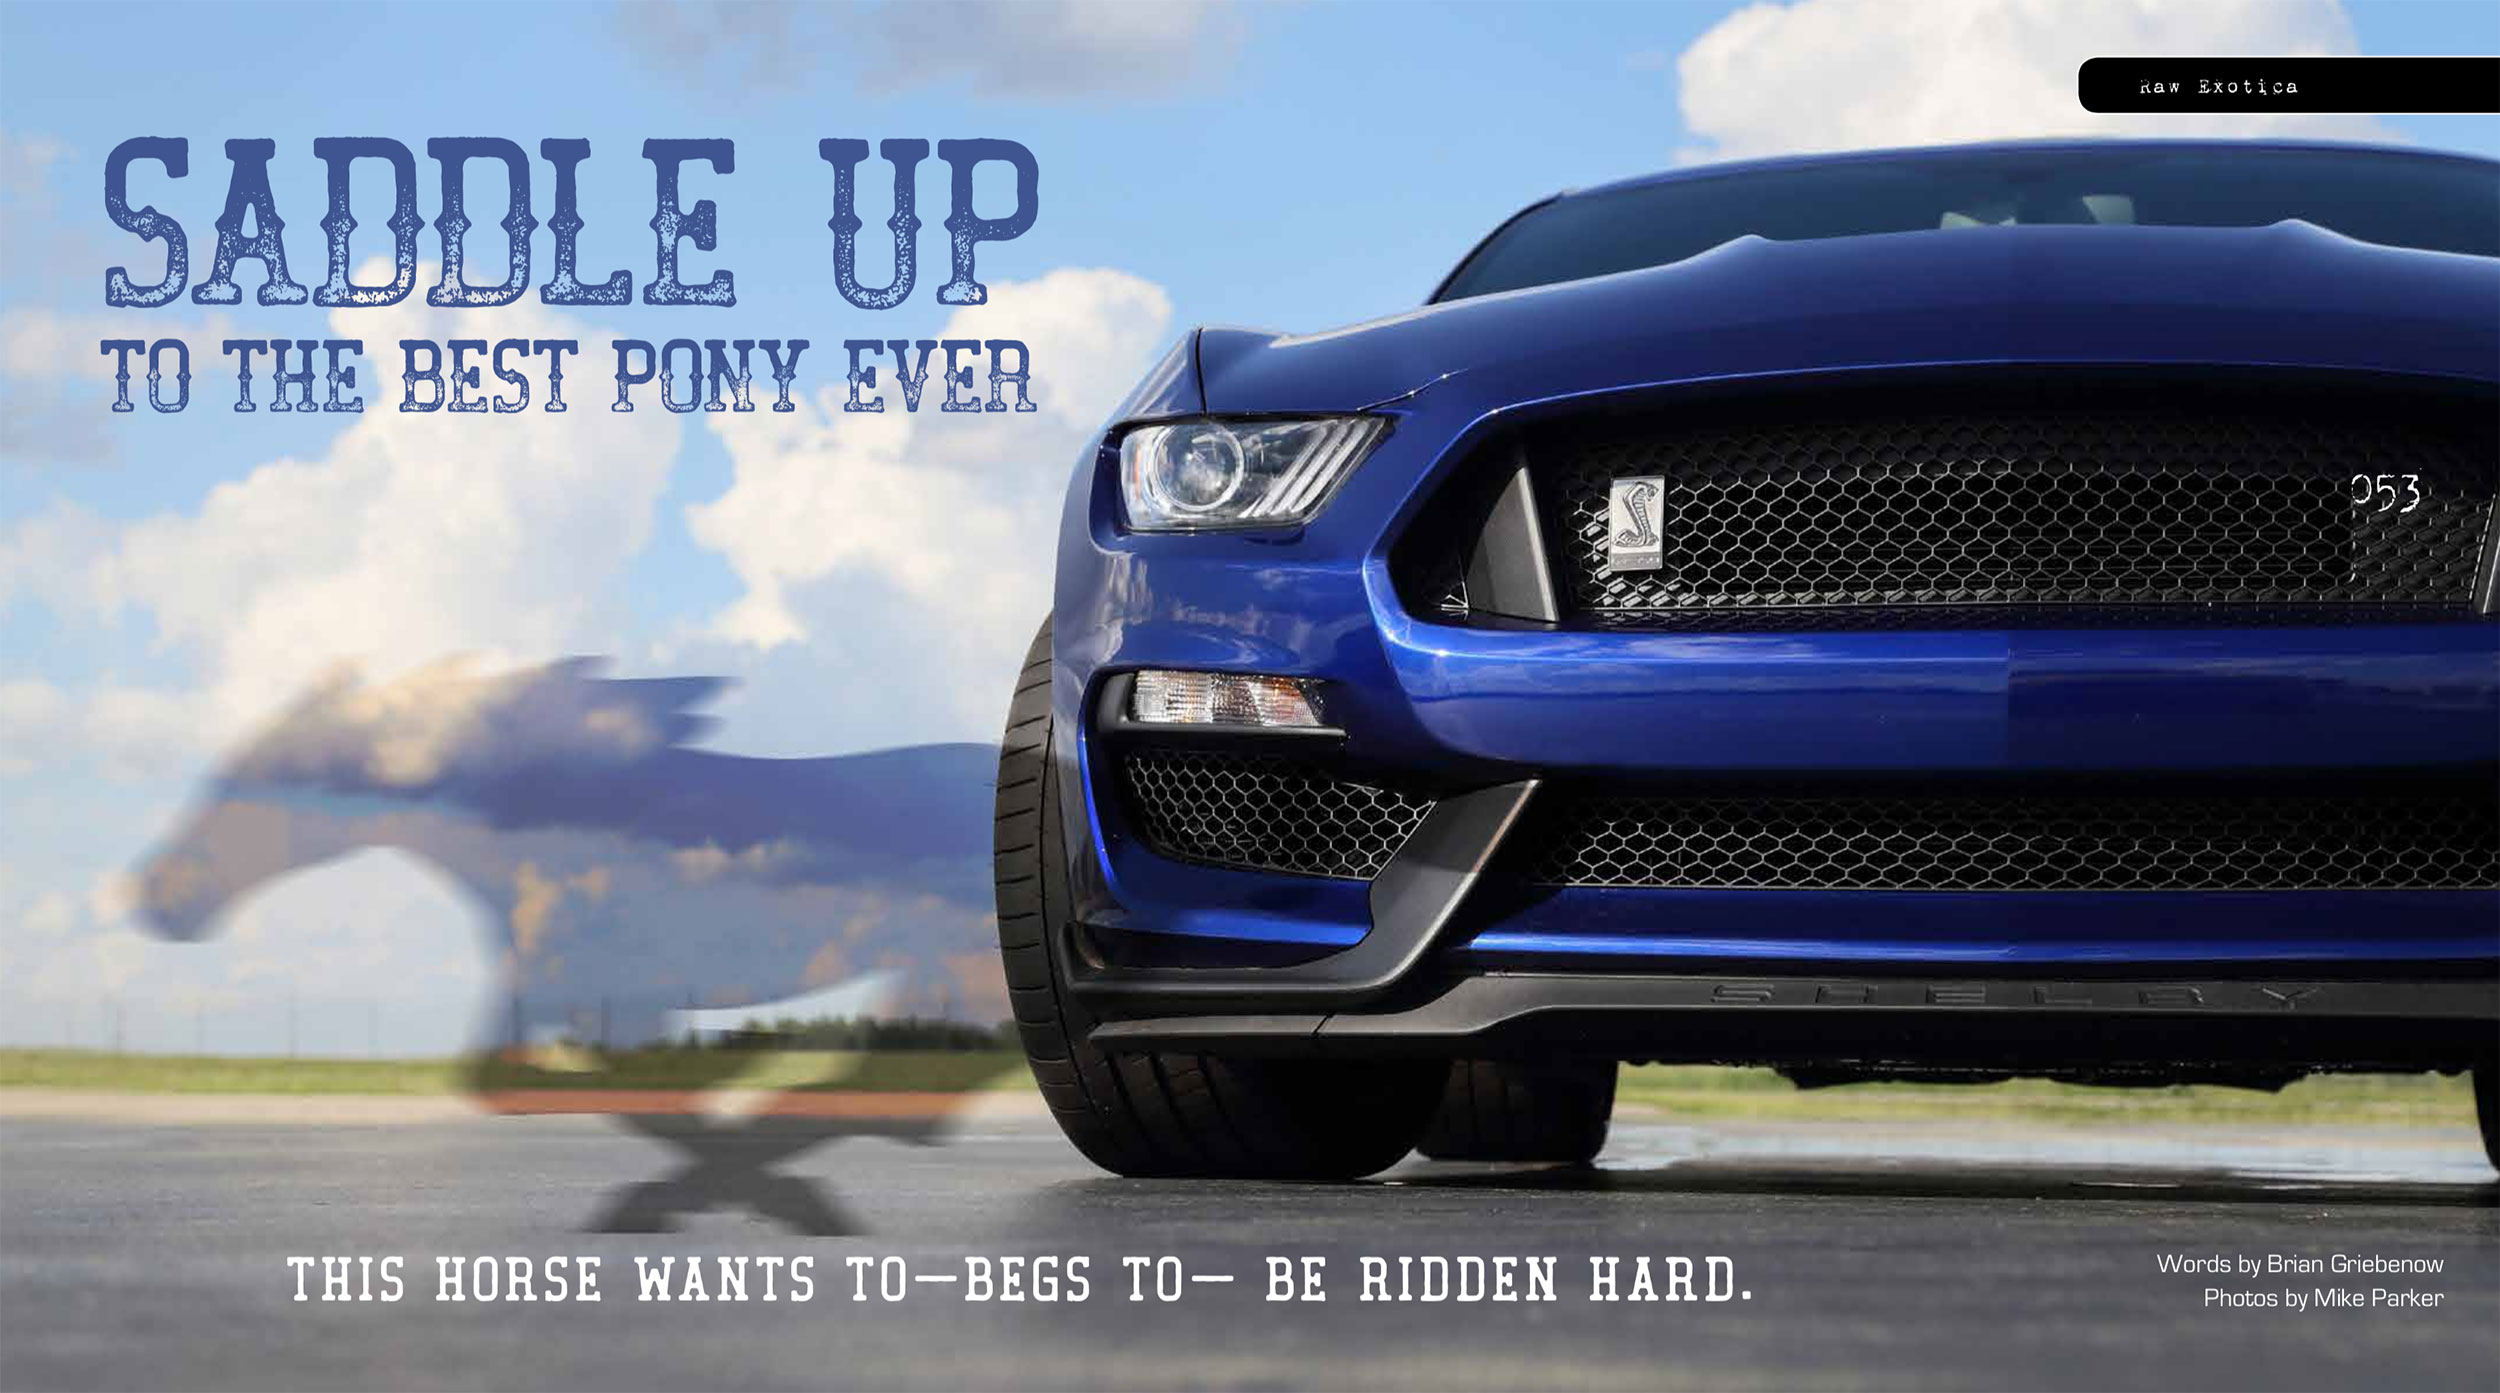 Saddle Up to the Best Pony Ever – Shelby GT350 as seen in issue 2017-02